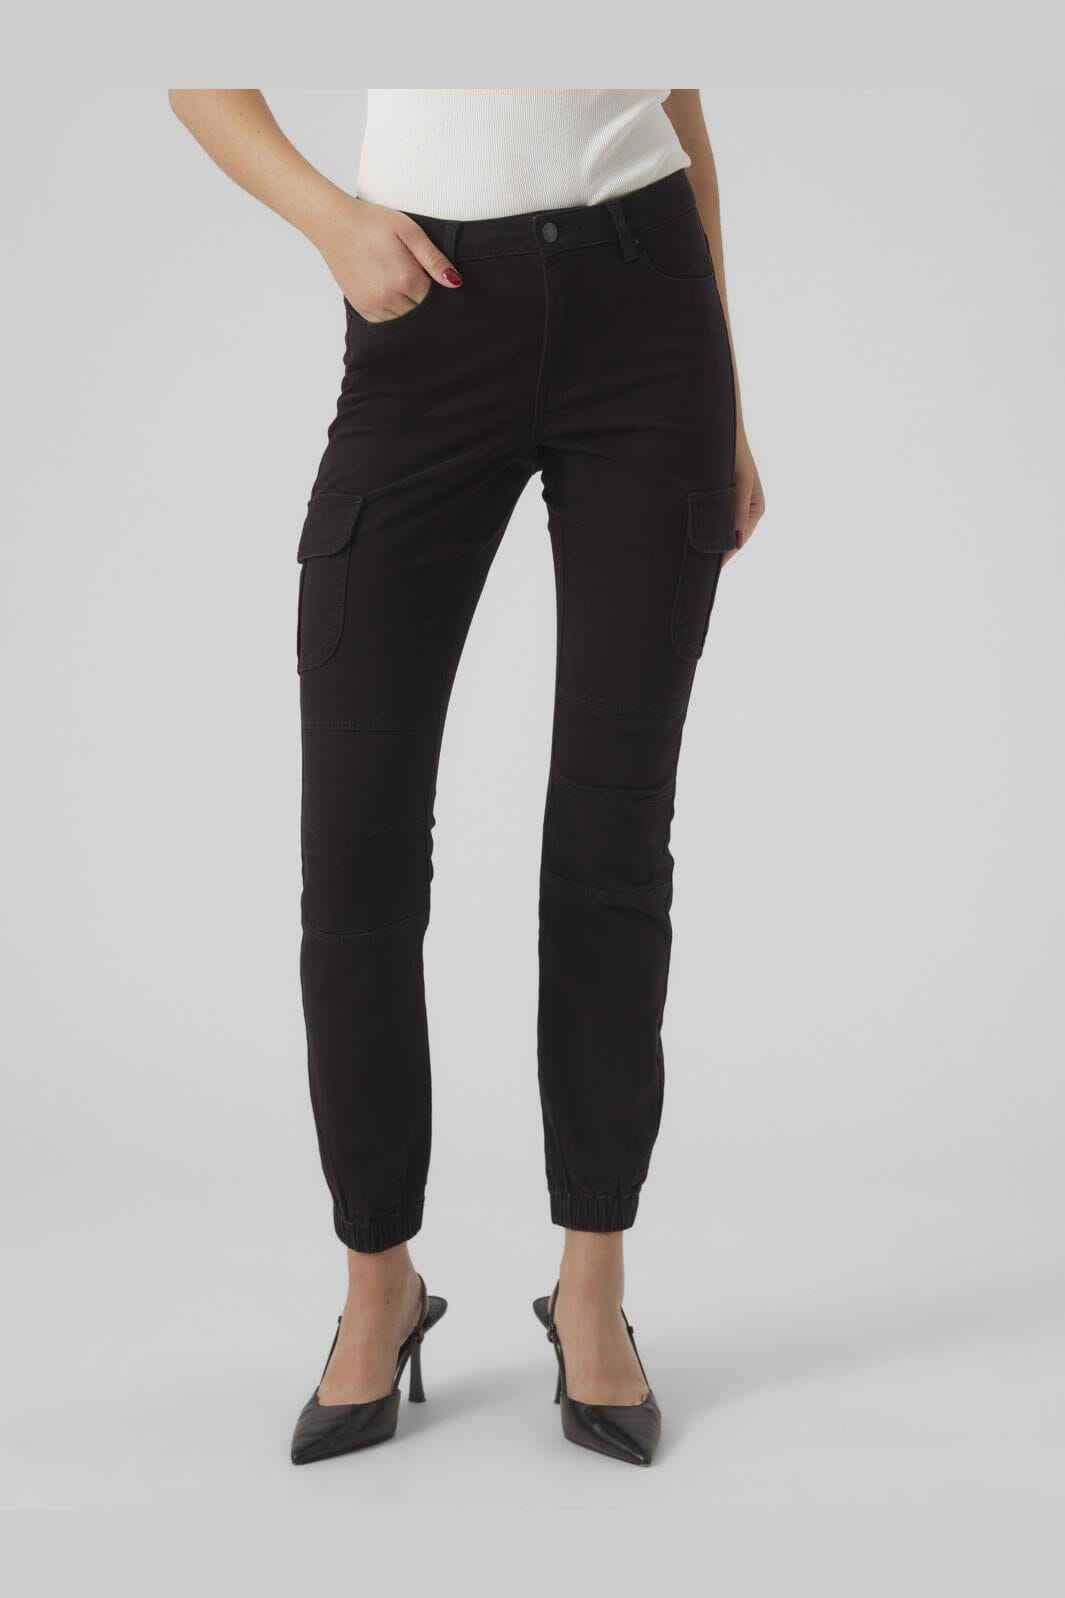 Vero Moda - Vmivy Mr Ankle Cargo Pants - 4273898 Black Washed